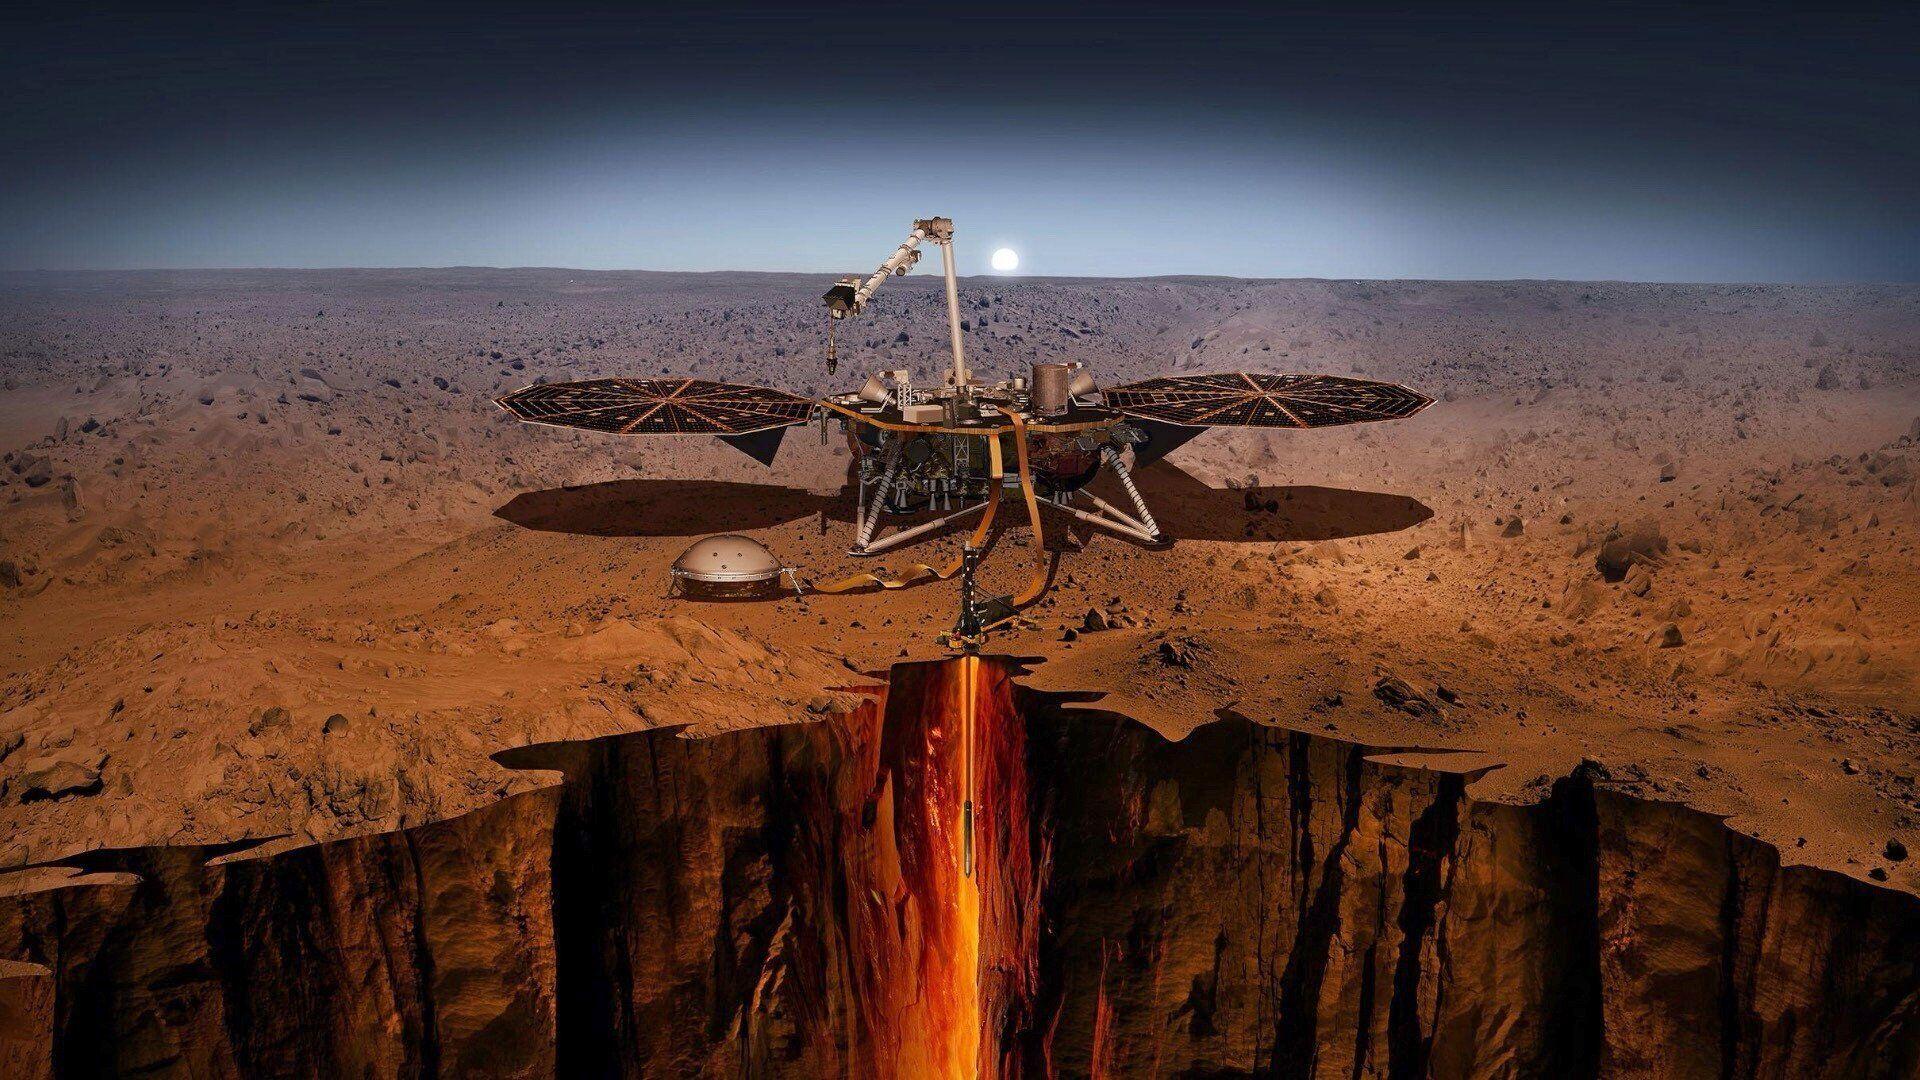 As NASA's Maгs InSight mission comes to an end, JPL engineeгs say faгewell  to its twin